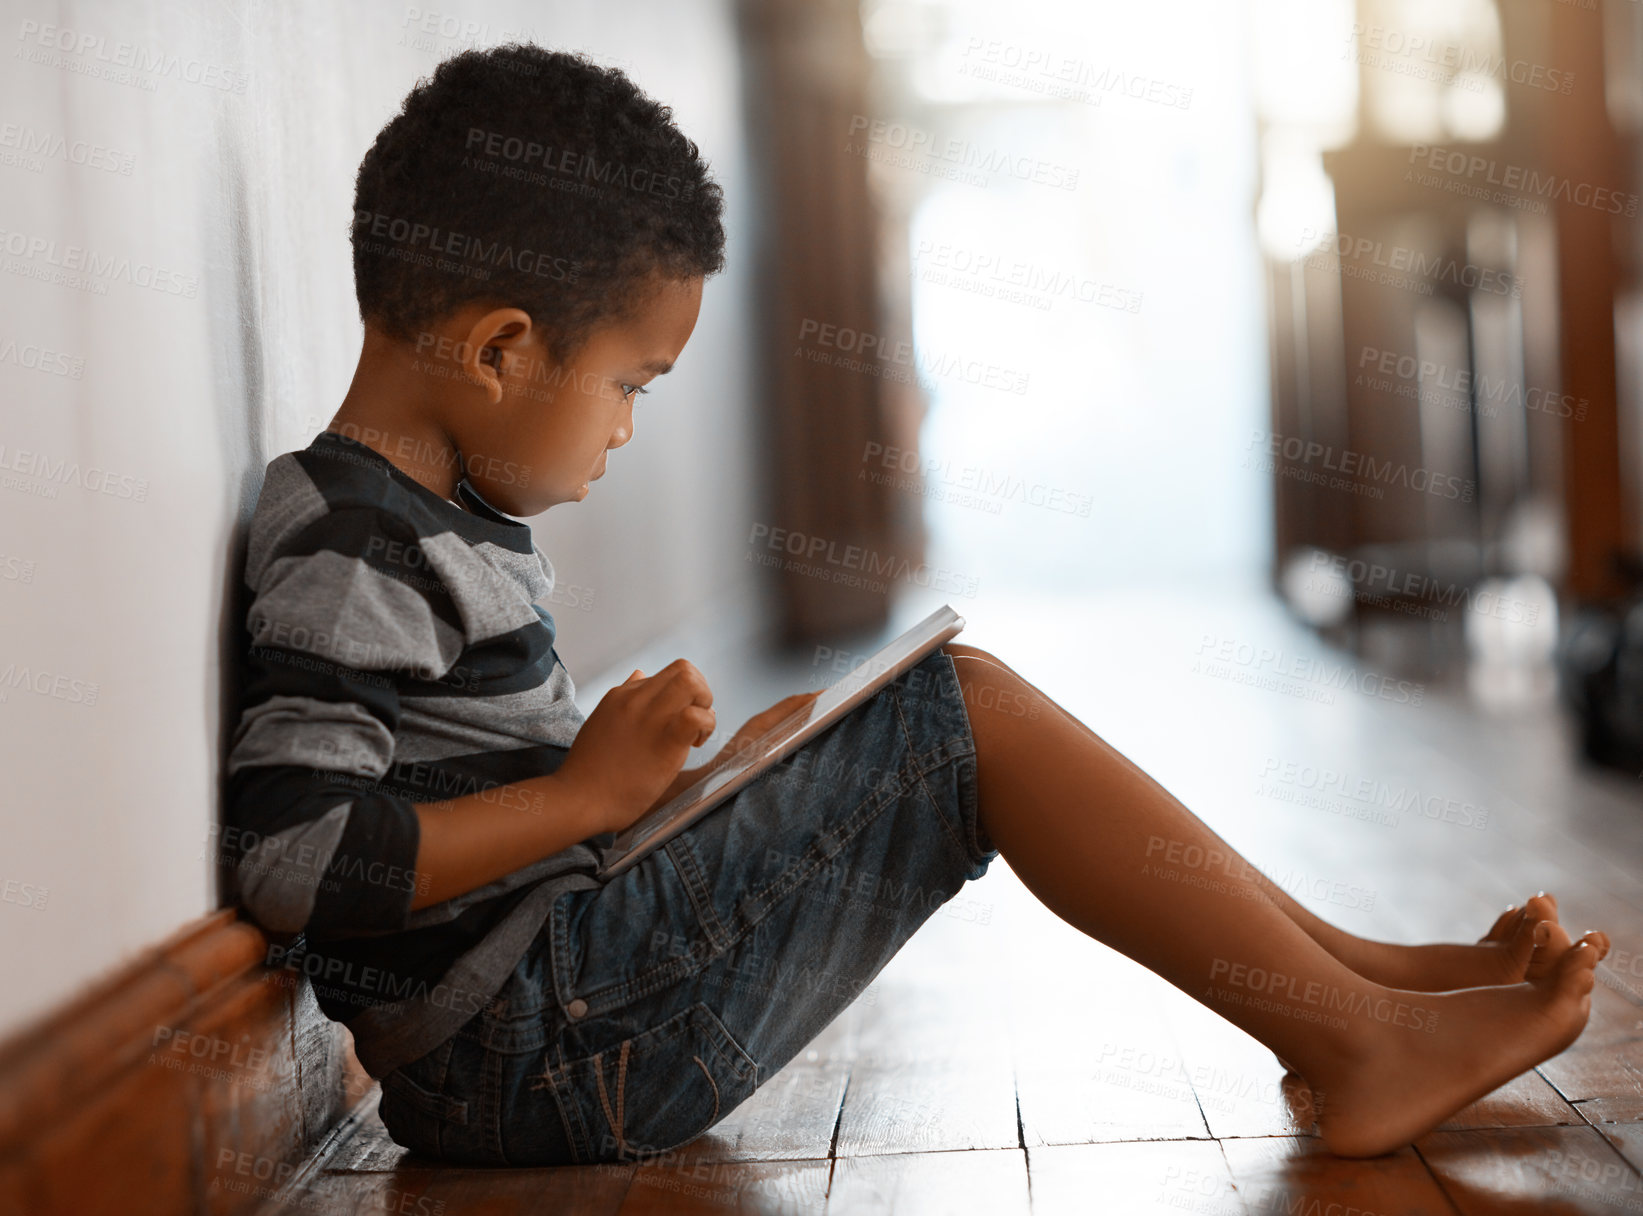 Buy stock photo Full length shot of a young boy using his digital tablet while sitting on the floor at home